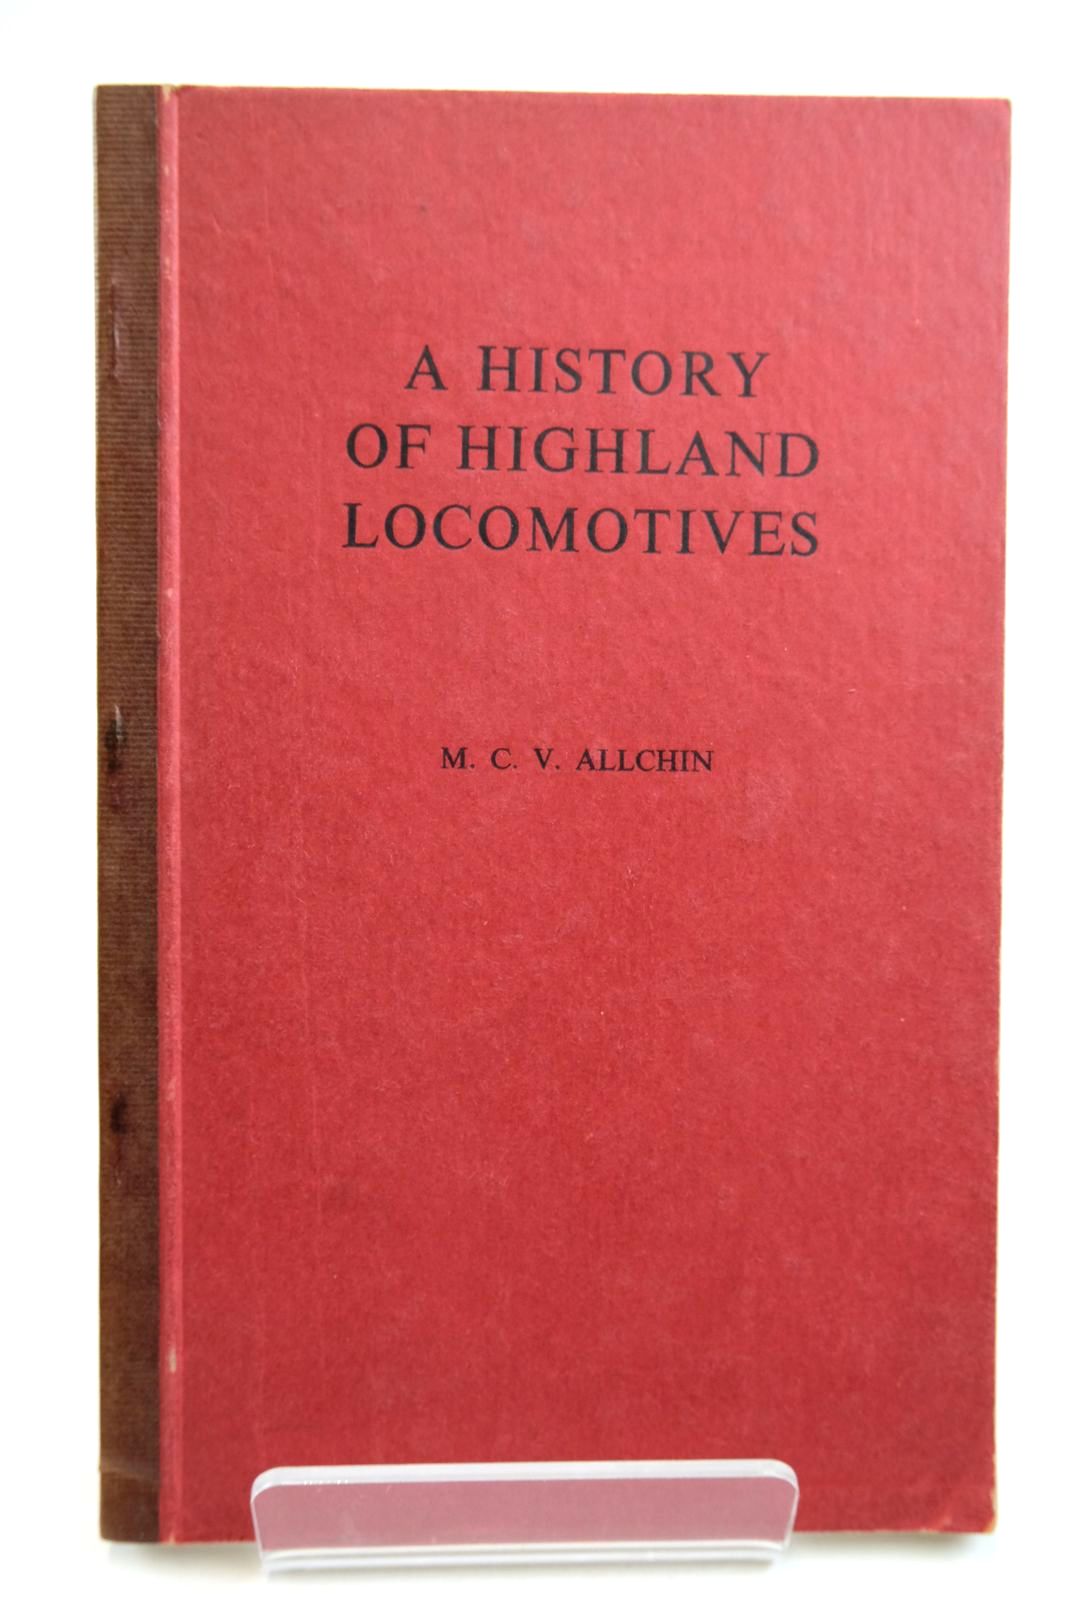 Photo of A HISTORY OF HIGHLAND LOCOMOTIVES written by Allchin, M.C.V. published by Railway Hobbies (STOCK CODE: 2133320)  for sale by Stella & Rose's Books